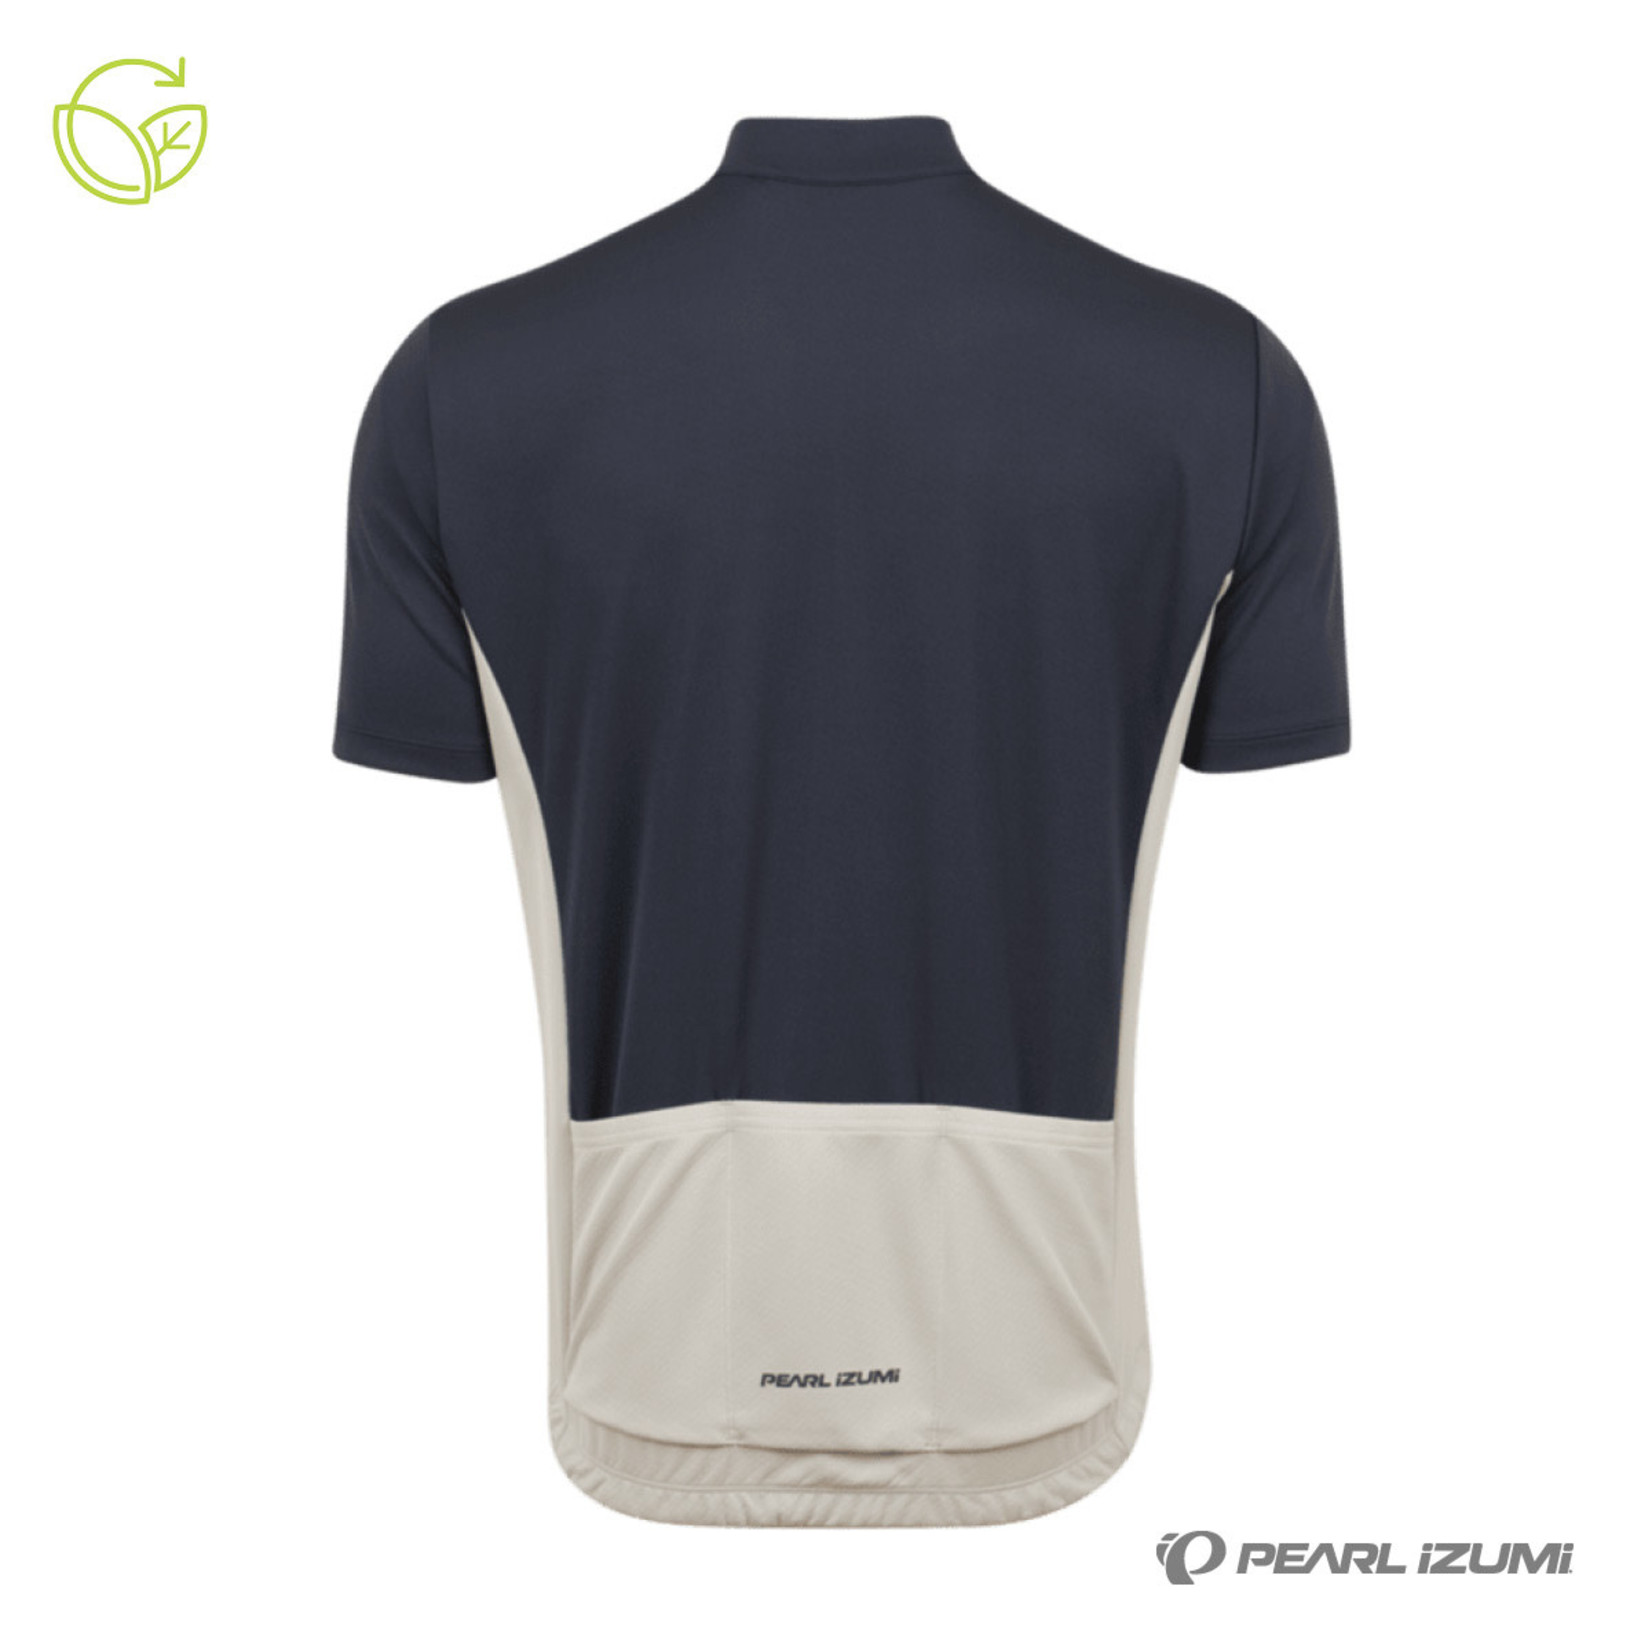 Pearl Izumi Pearl Izumi Quest Short Sleeve Jersey - Stone Dark Ink -50% Recycled Material